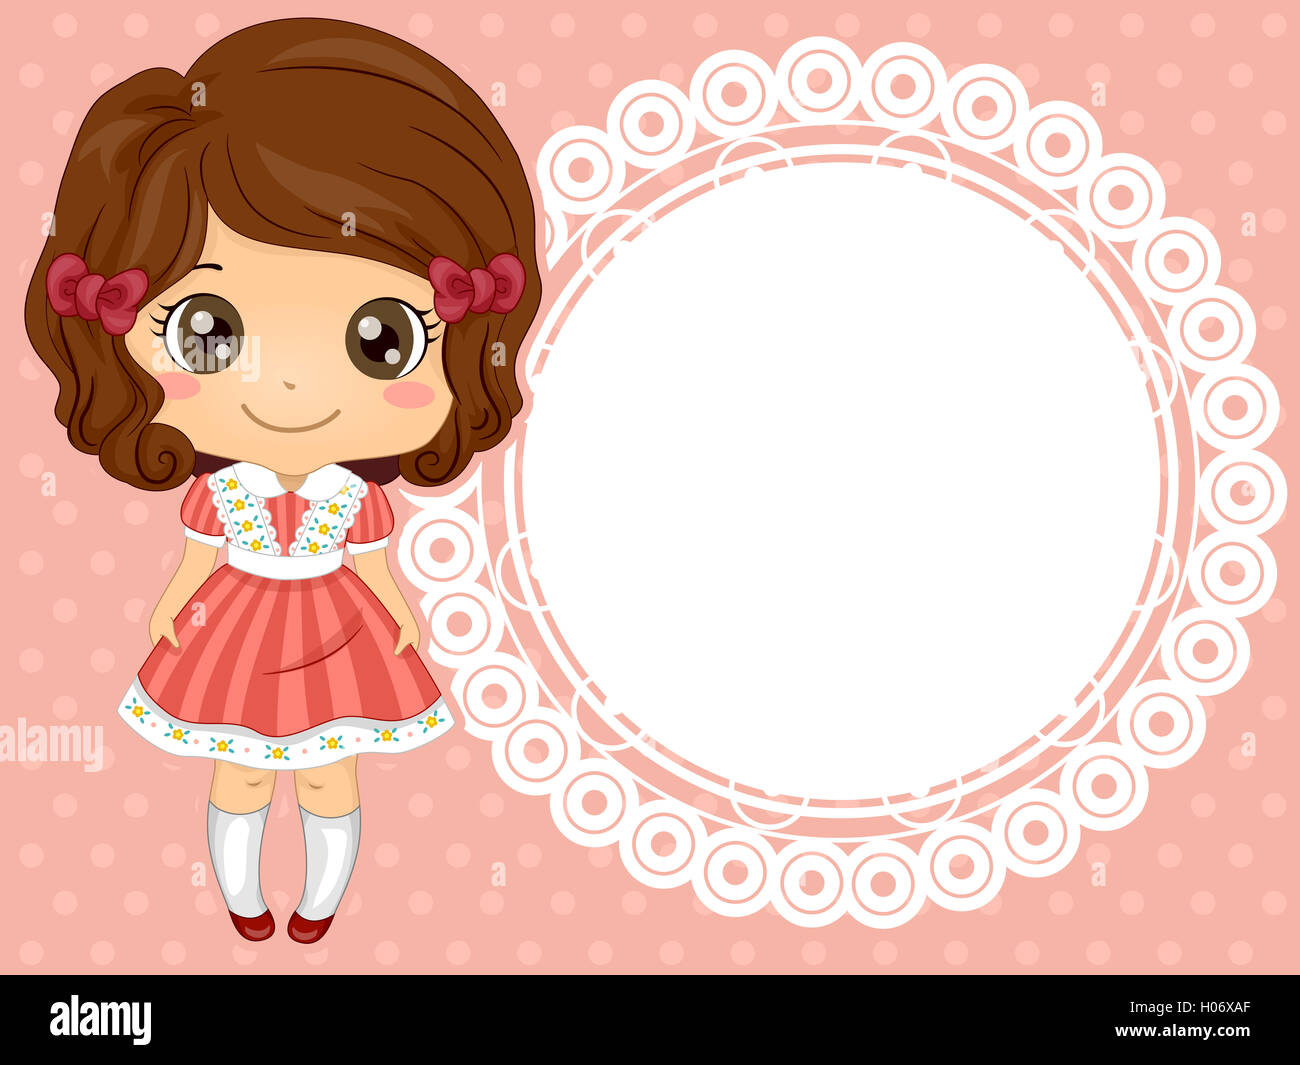 Frame Illustration of a Cute Little Girl in a Frilly Dress Stock Photo